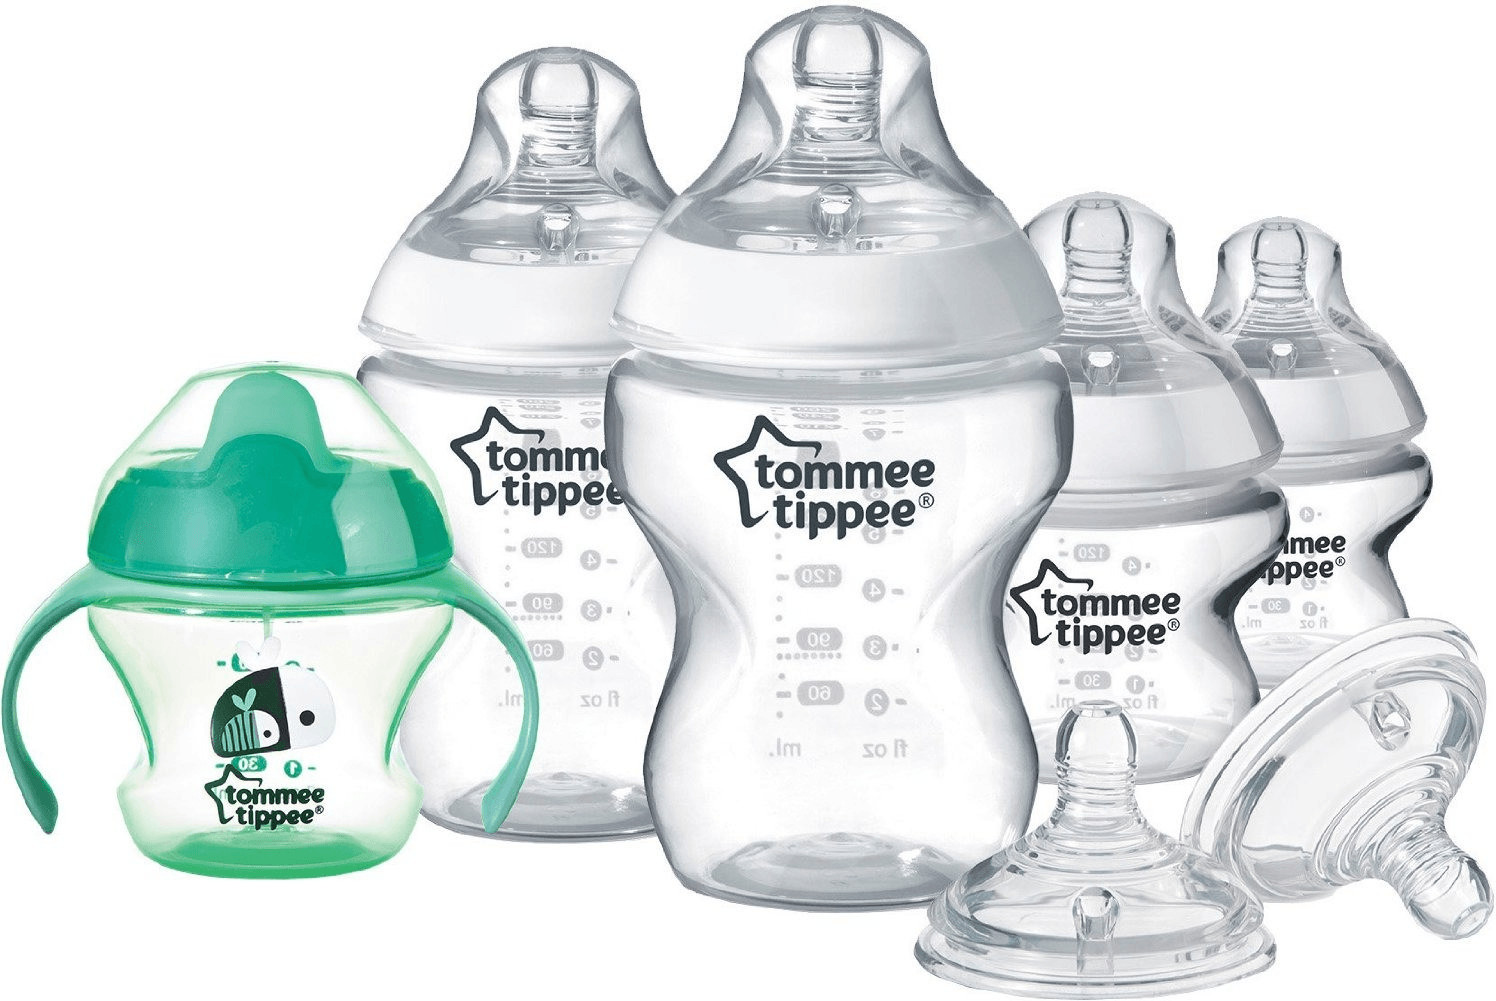 Buy Tommee Tippee Starter Kit from £26.74 (Today) – Best Deals on